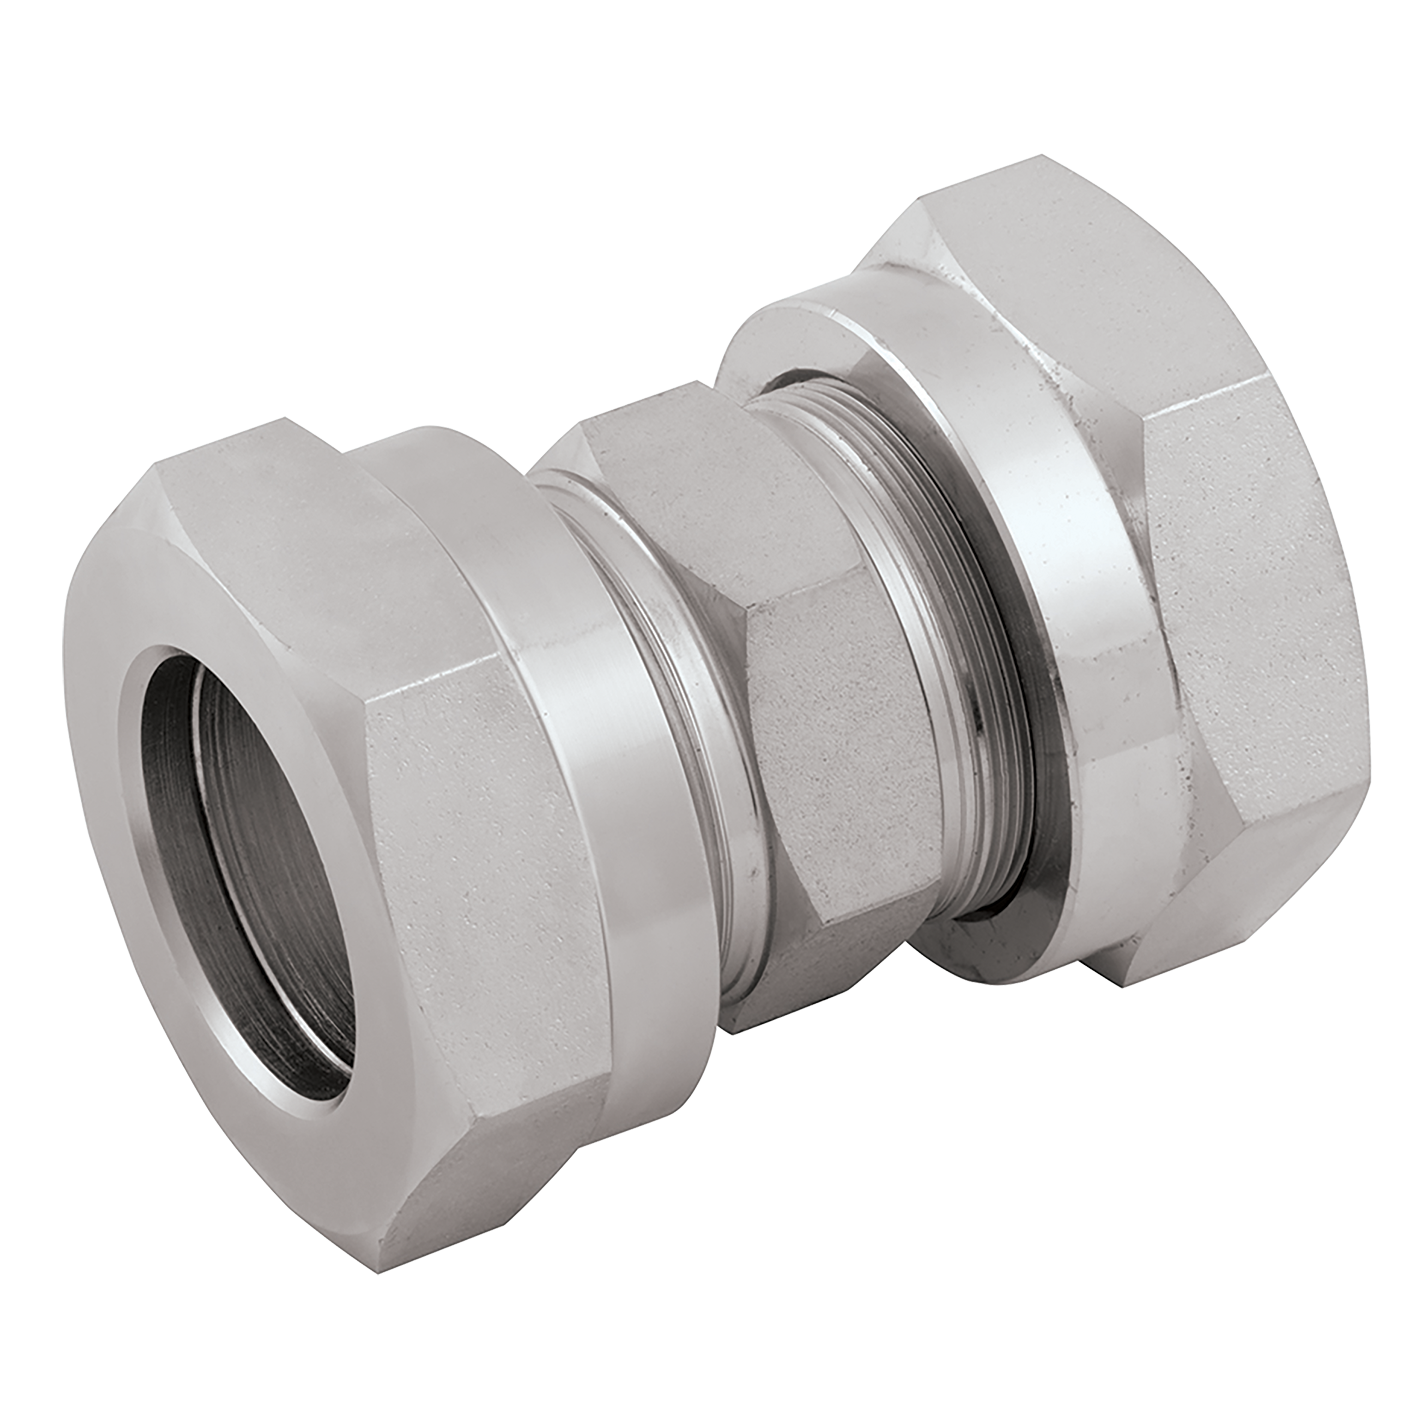 1/2" NB EQUAL STRAIGHTAIGHT COUPLING